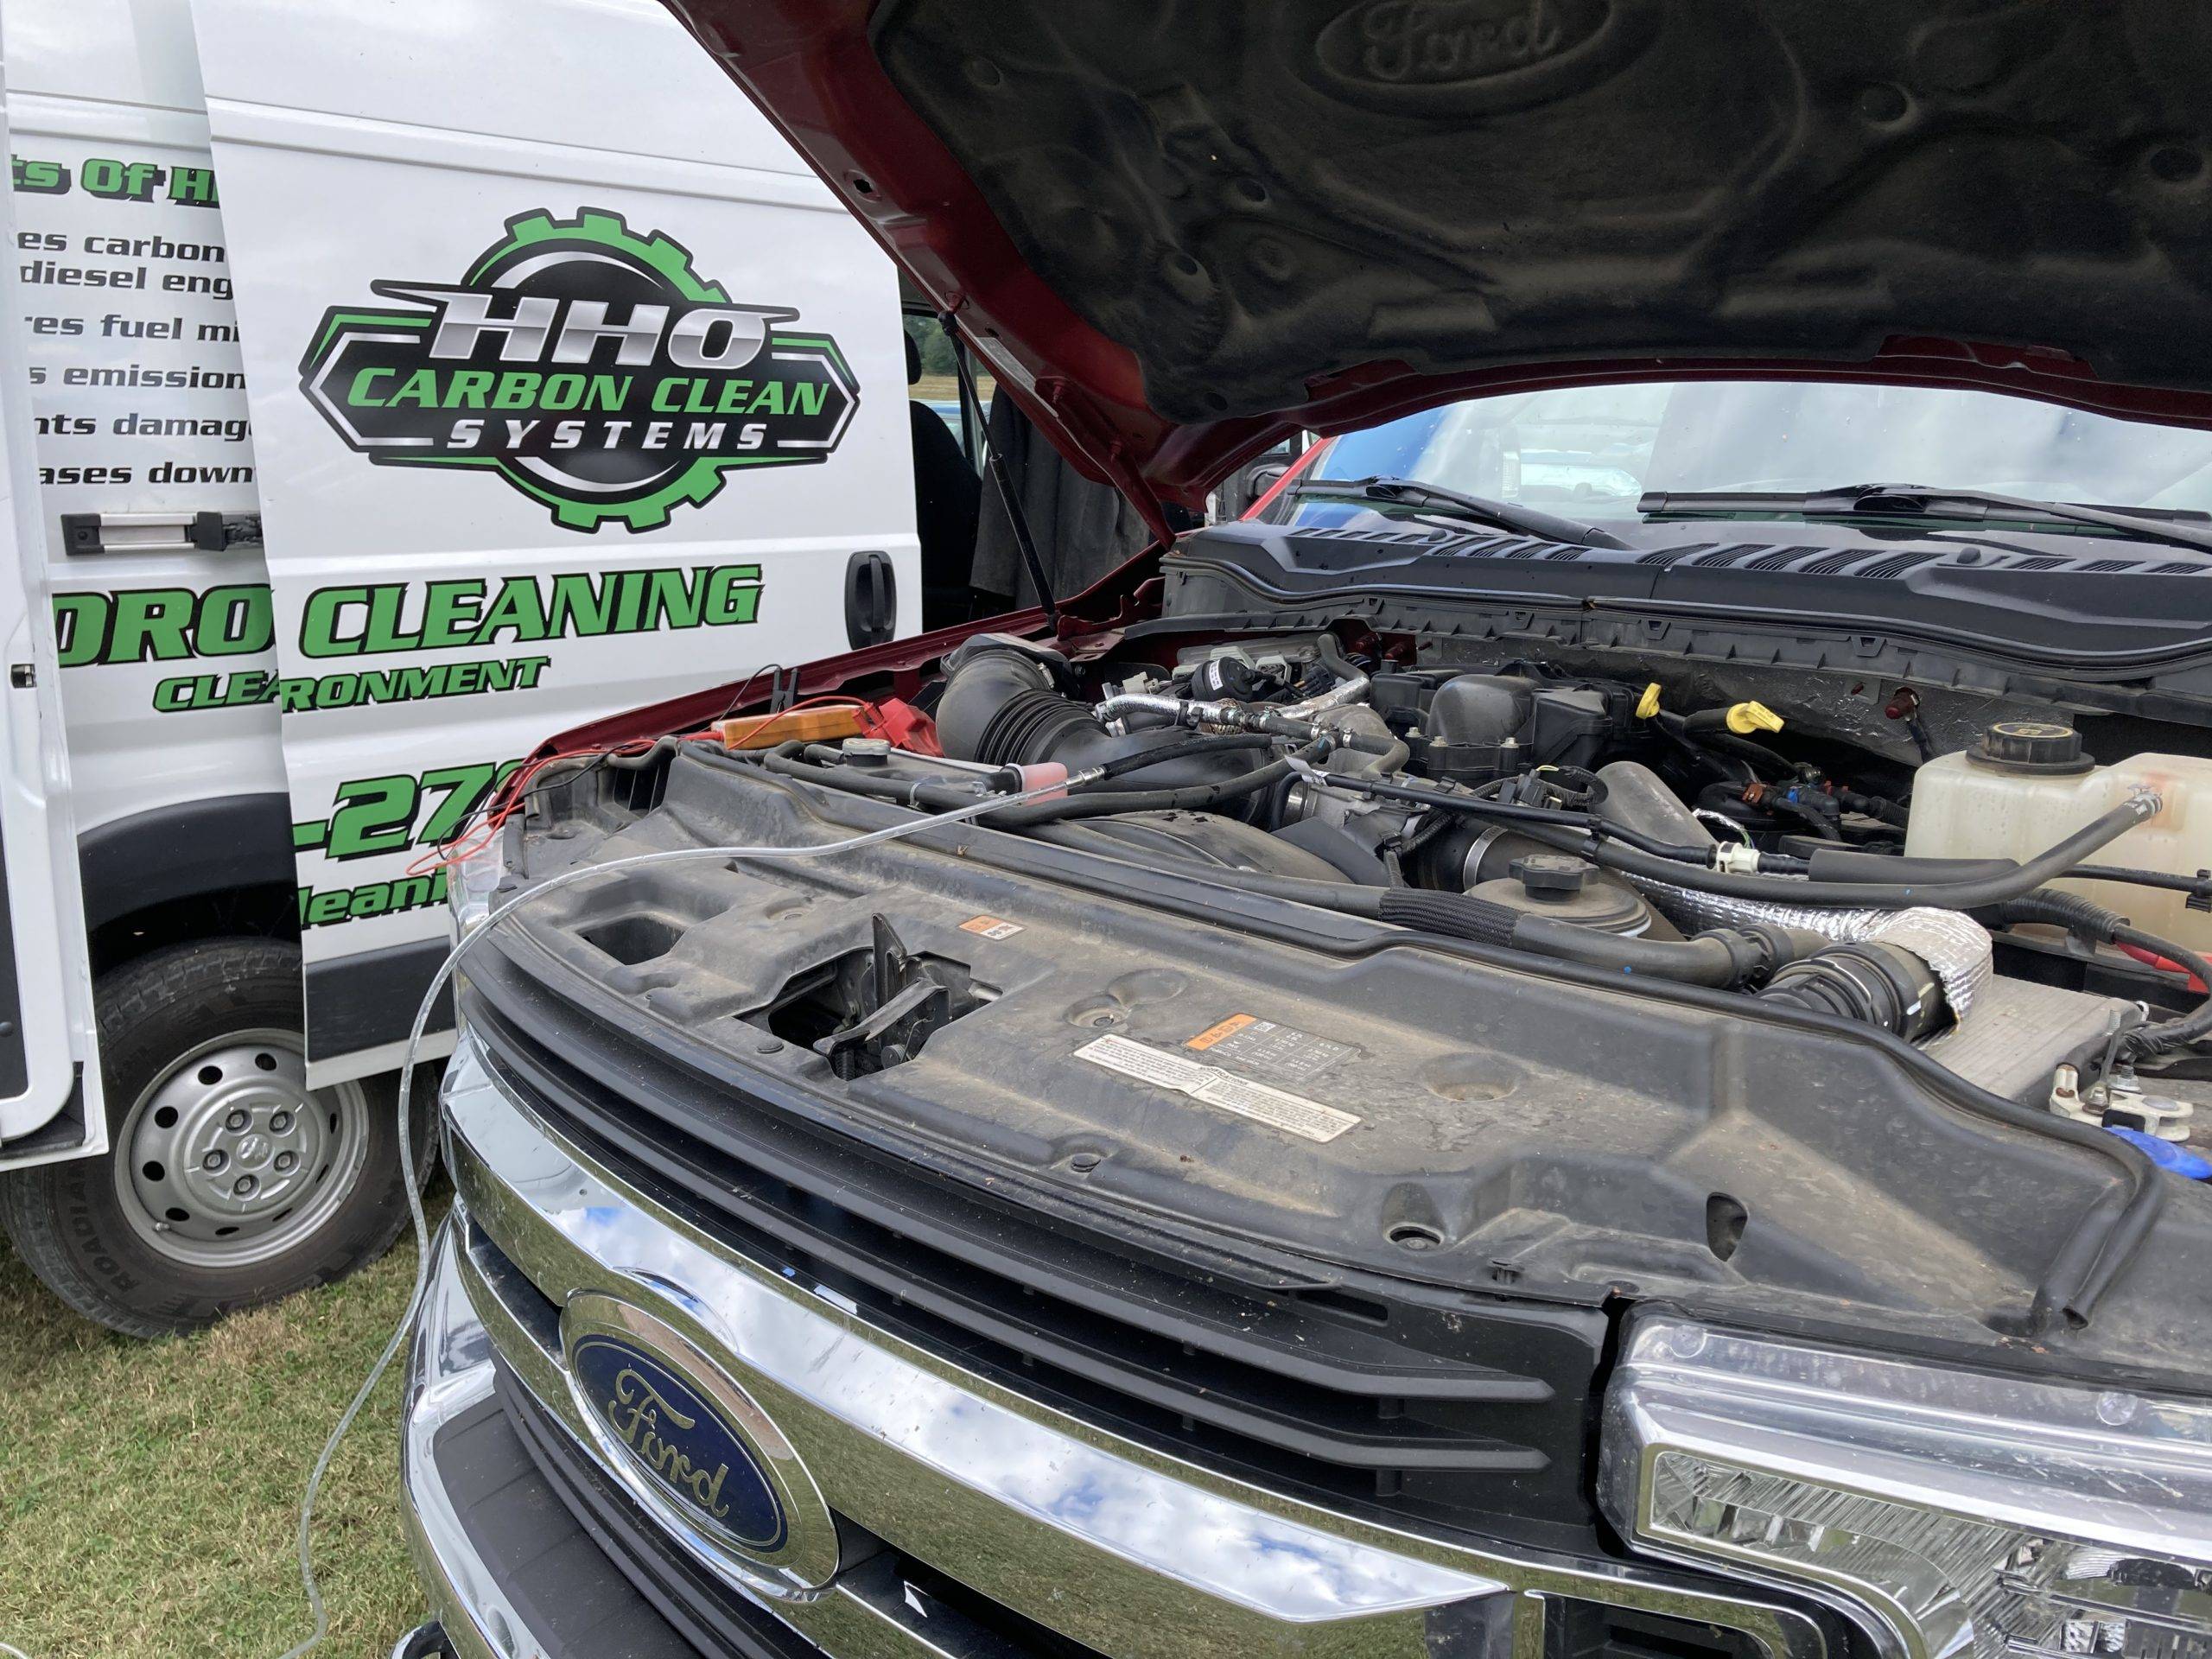 HHO Carbon Clean Systems Franchise North Carolina